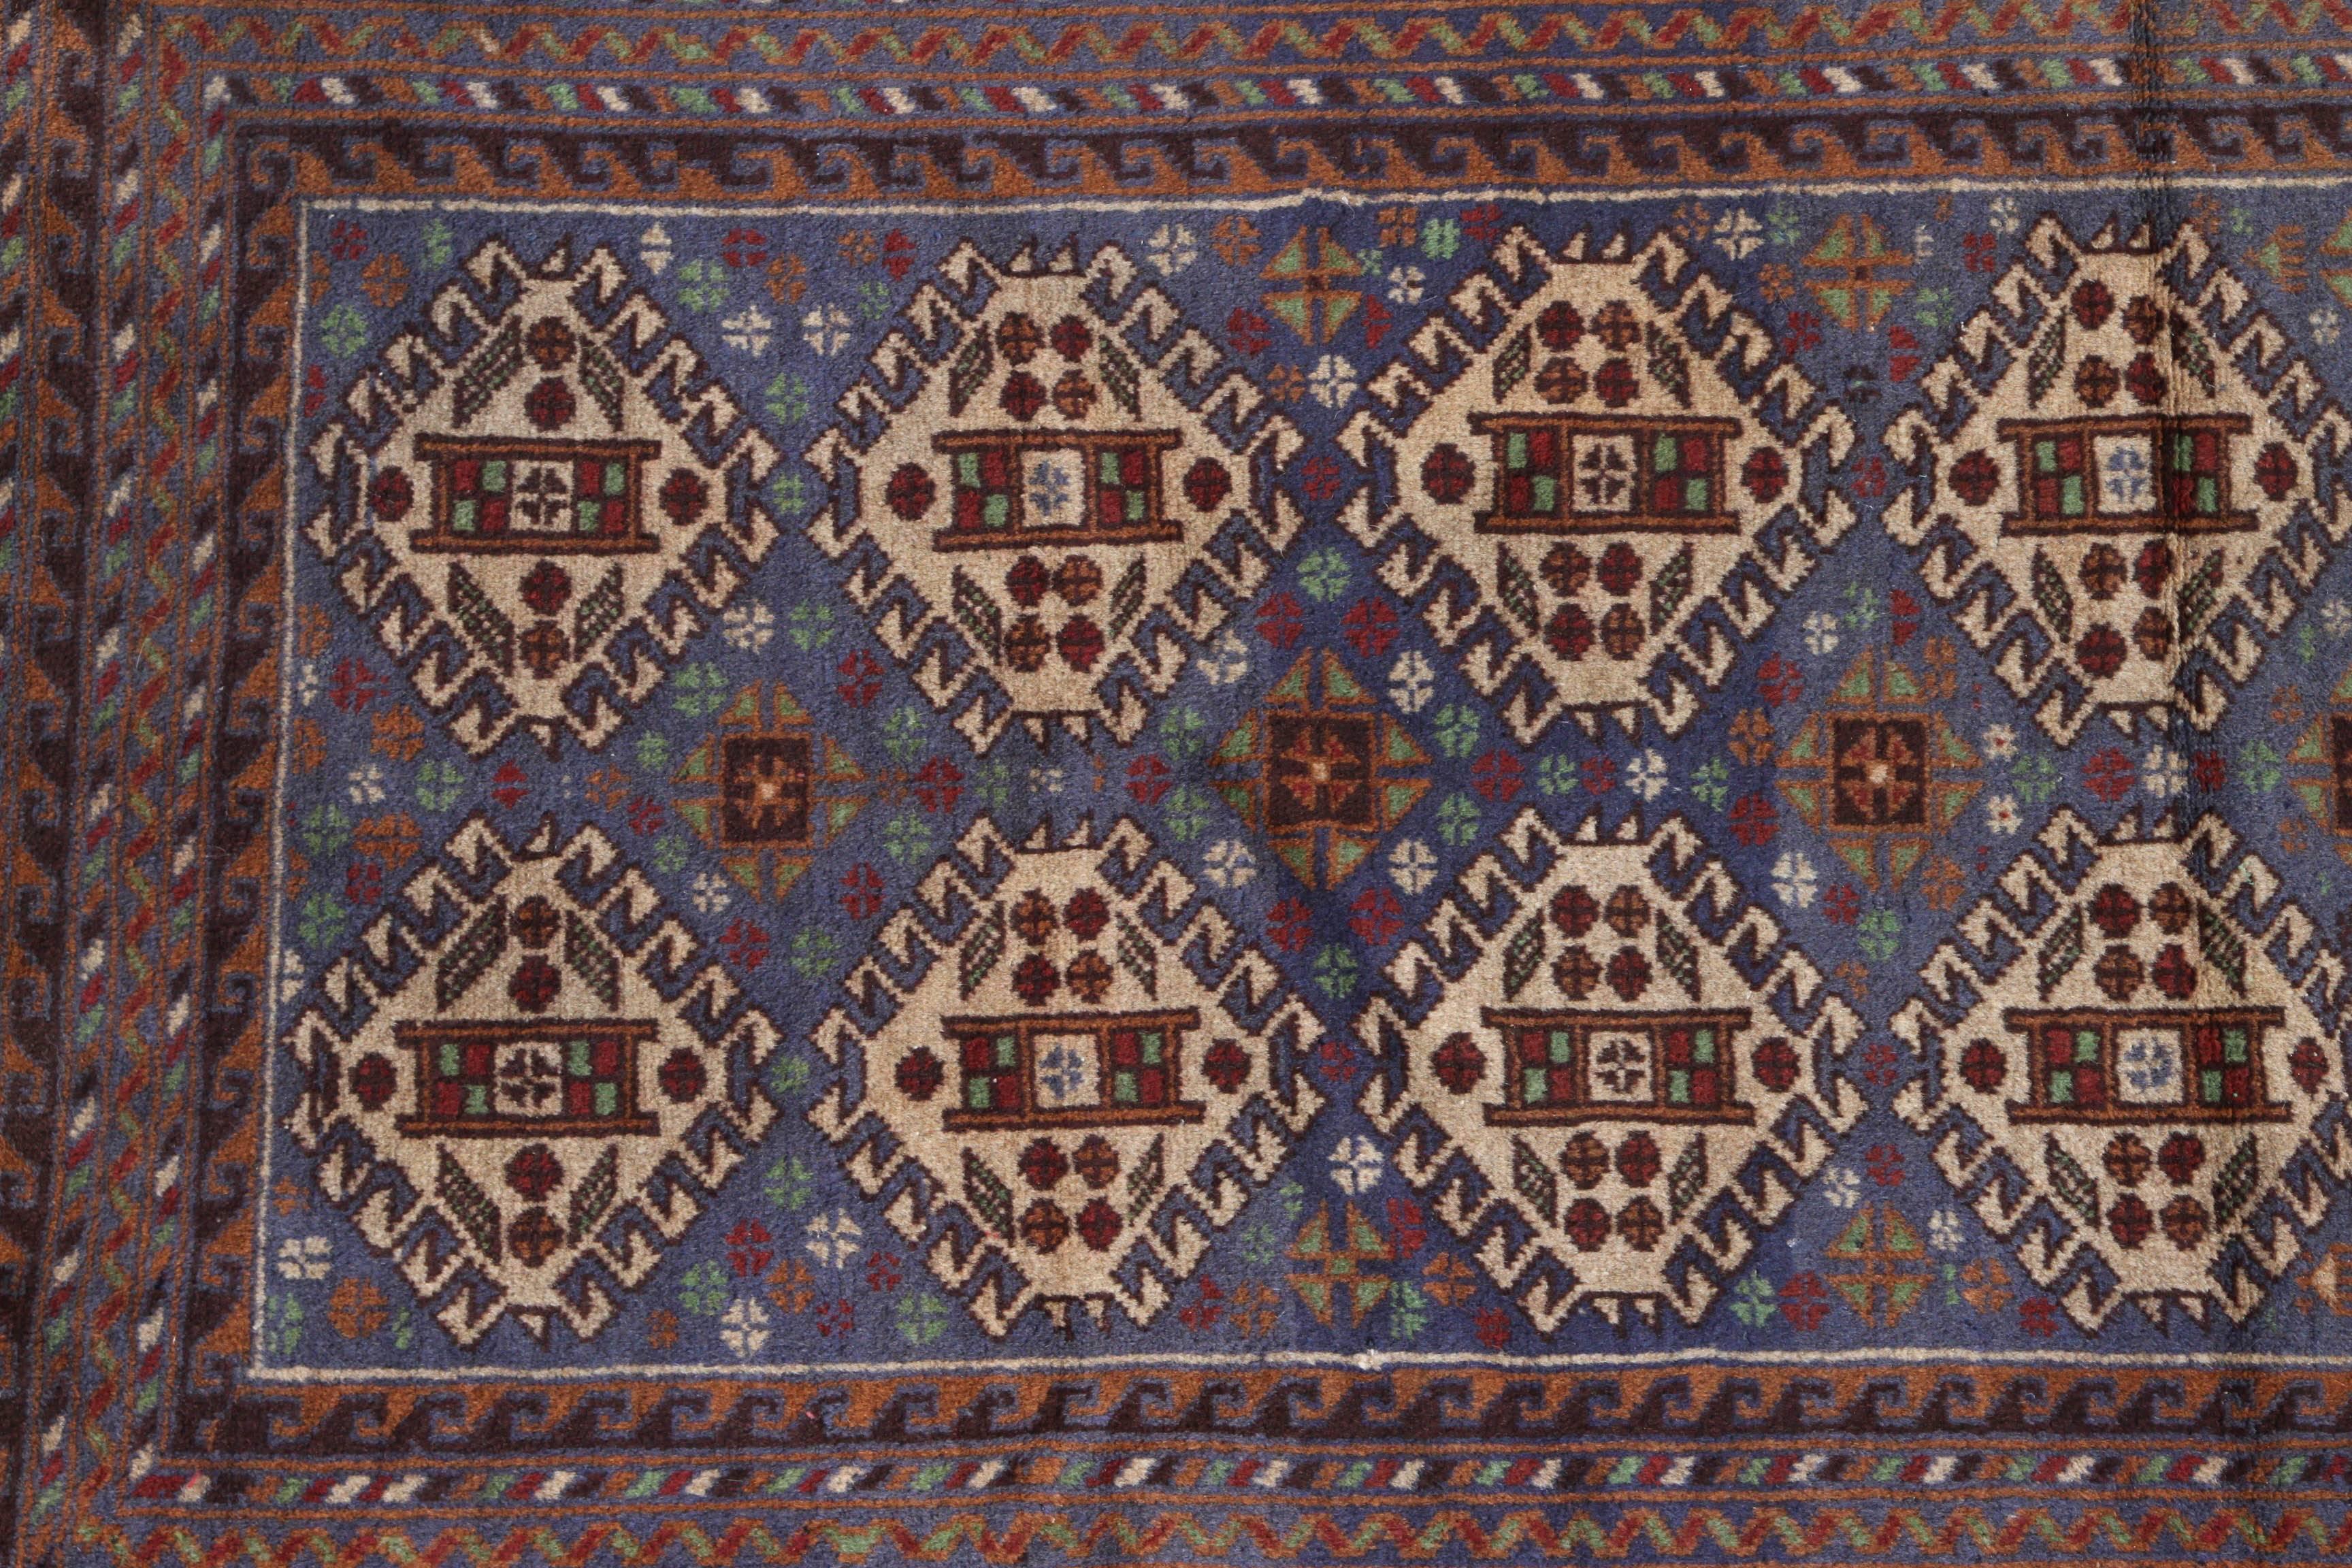 Antique Persian Baluchi rug with multicolored repeating patterns in the center. The outer edge contains rows of repeating wave pattern. Baluchi carpets are handmade carpets originally made by Baluch nomads, living near Iraq, Pakistan and Afghanistan.